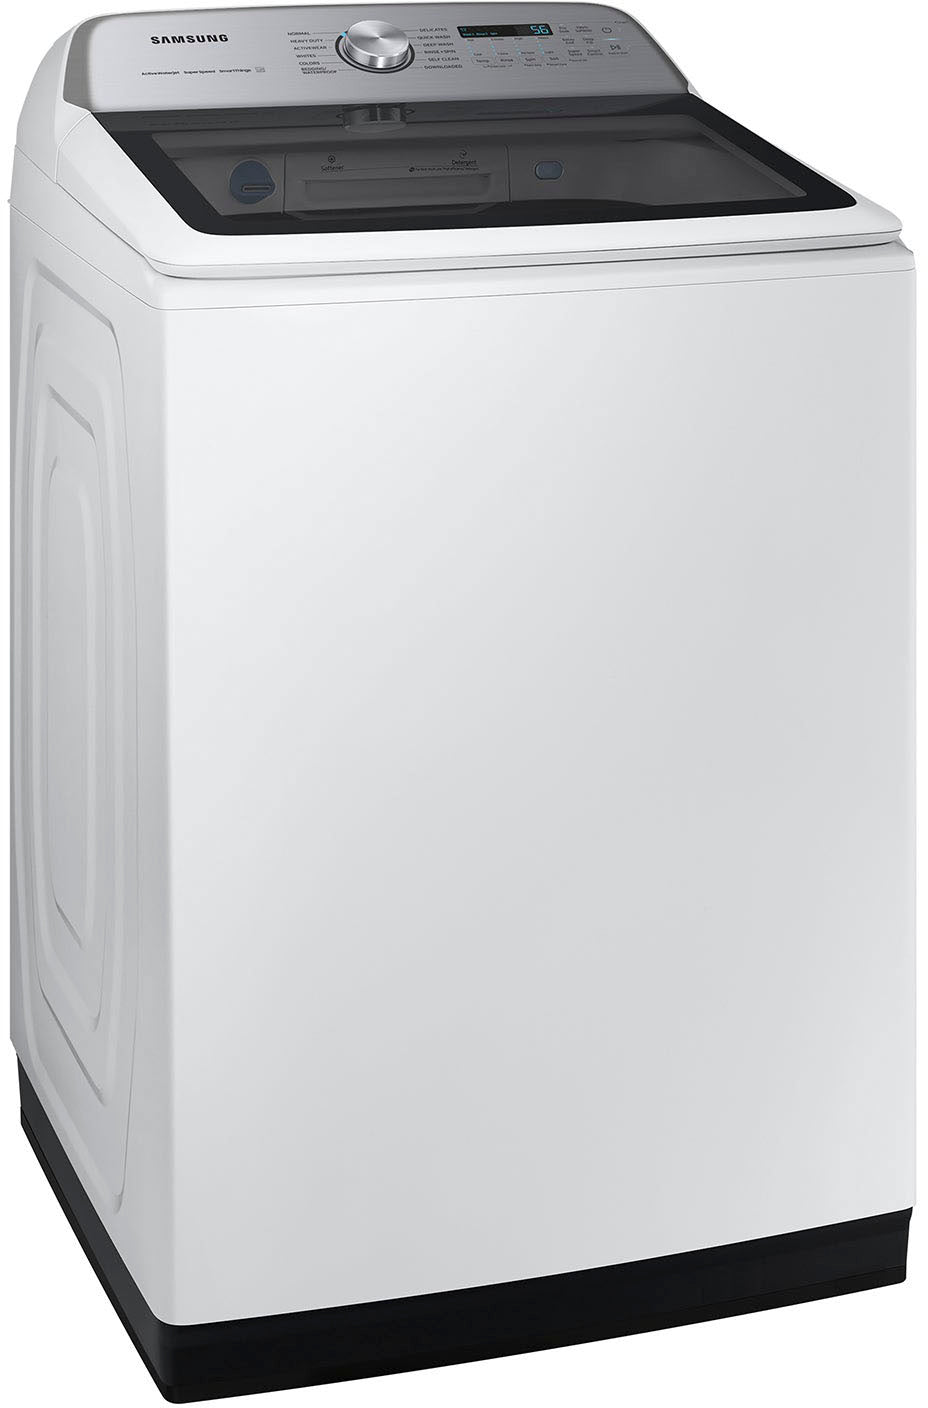 Samsung - 5.4 cu. ft. High-Efficiency Smart Top Load Washer with ActiveWave Agitator and Super Speed Wash - White_8